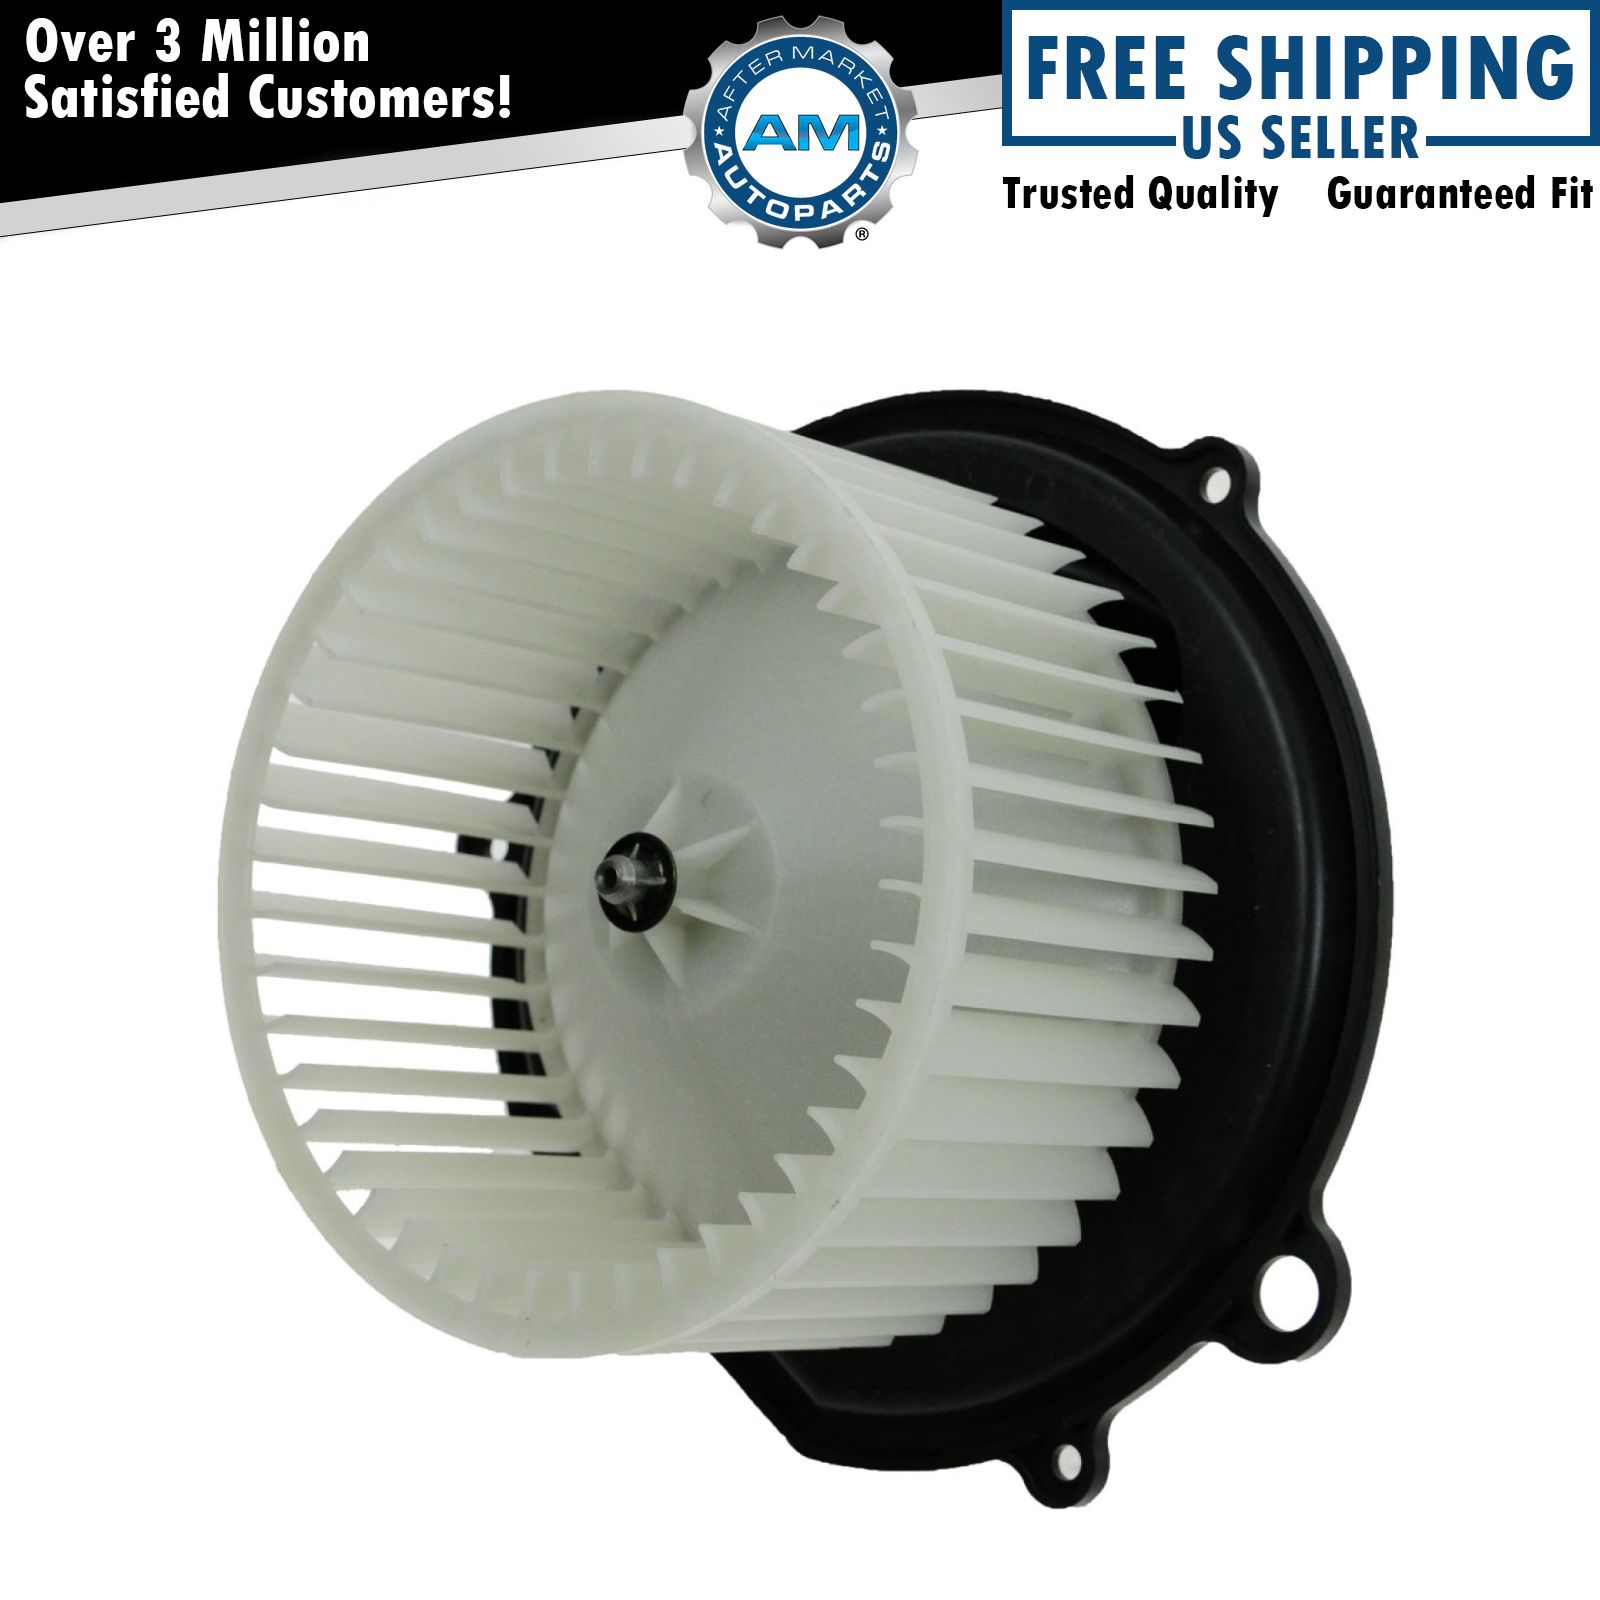 Heater Blower Motor with Fan Cage for Mercury Sable Ford Taurus